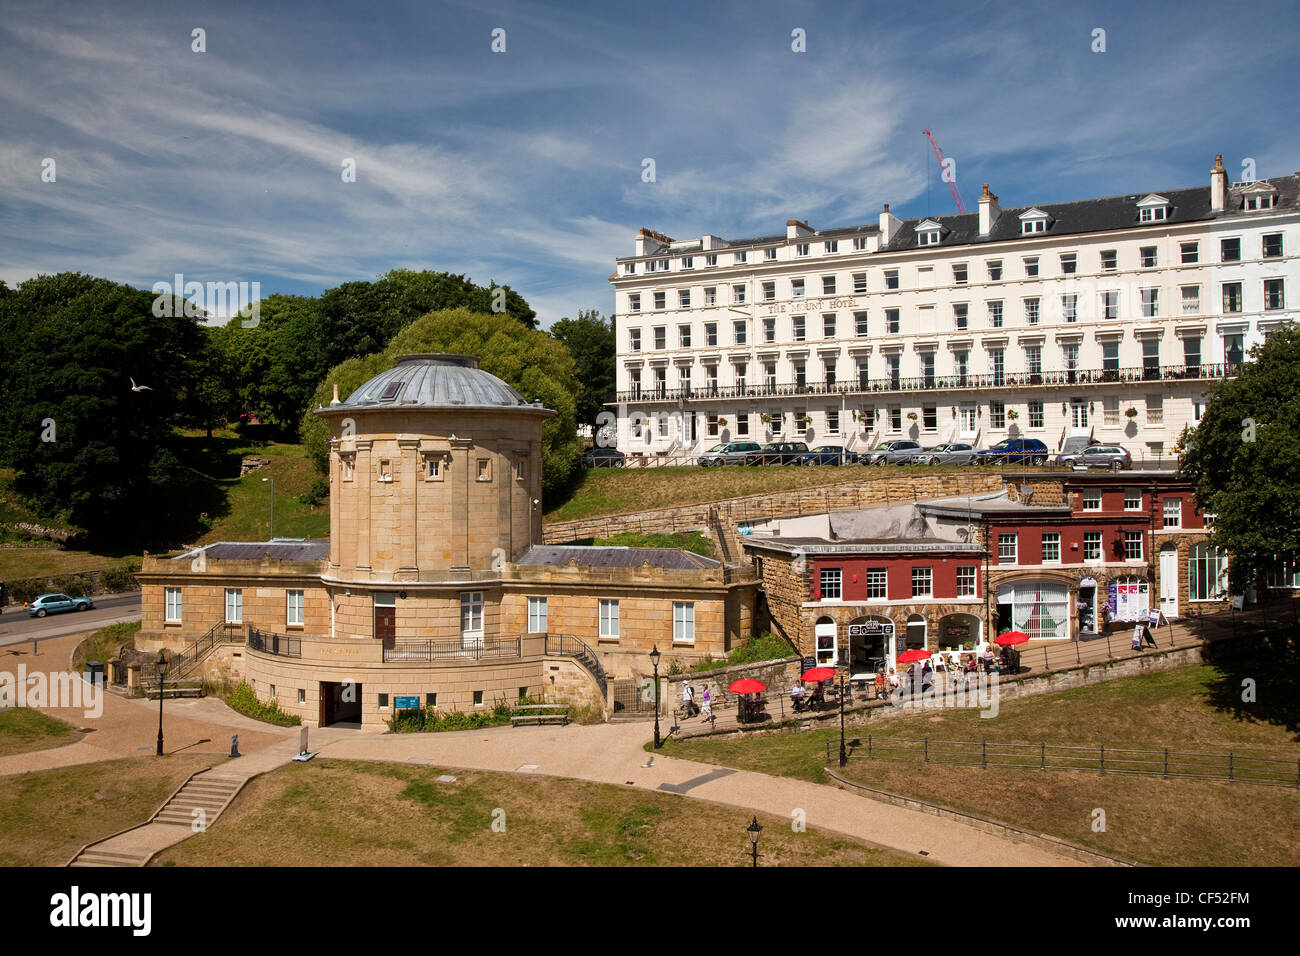 The Rotunda Museum, refurbished in 2008, was built in 1829 as one of the country's first purpose built museums. Stock Photo